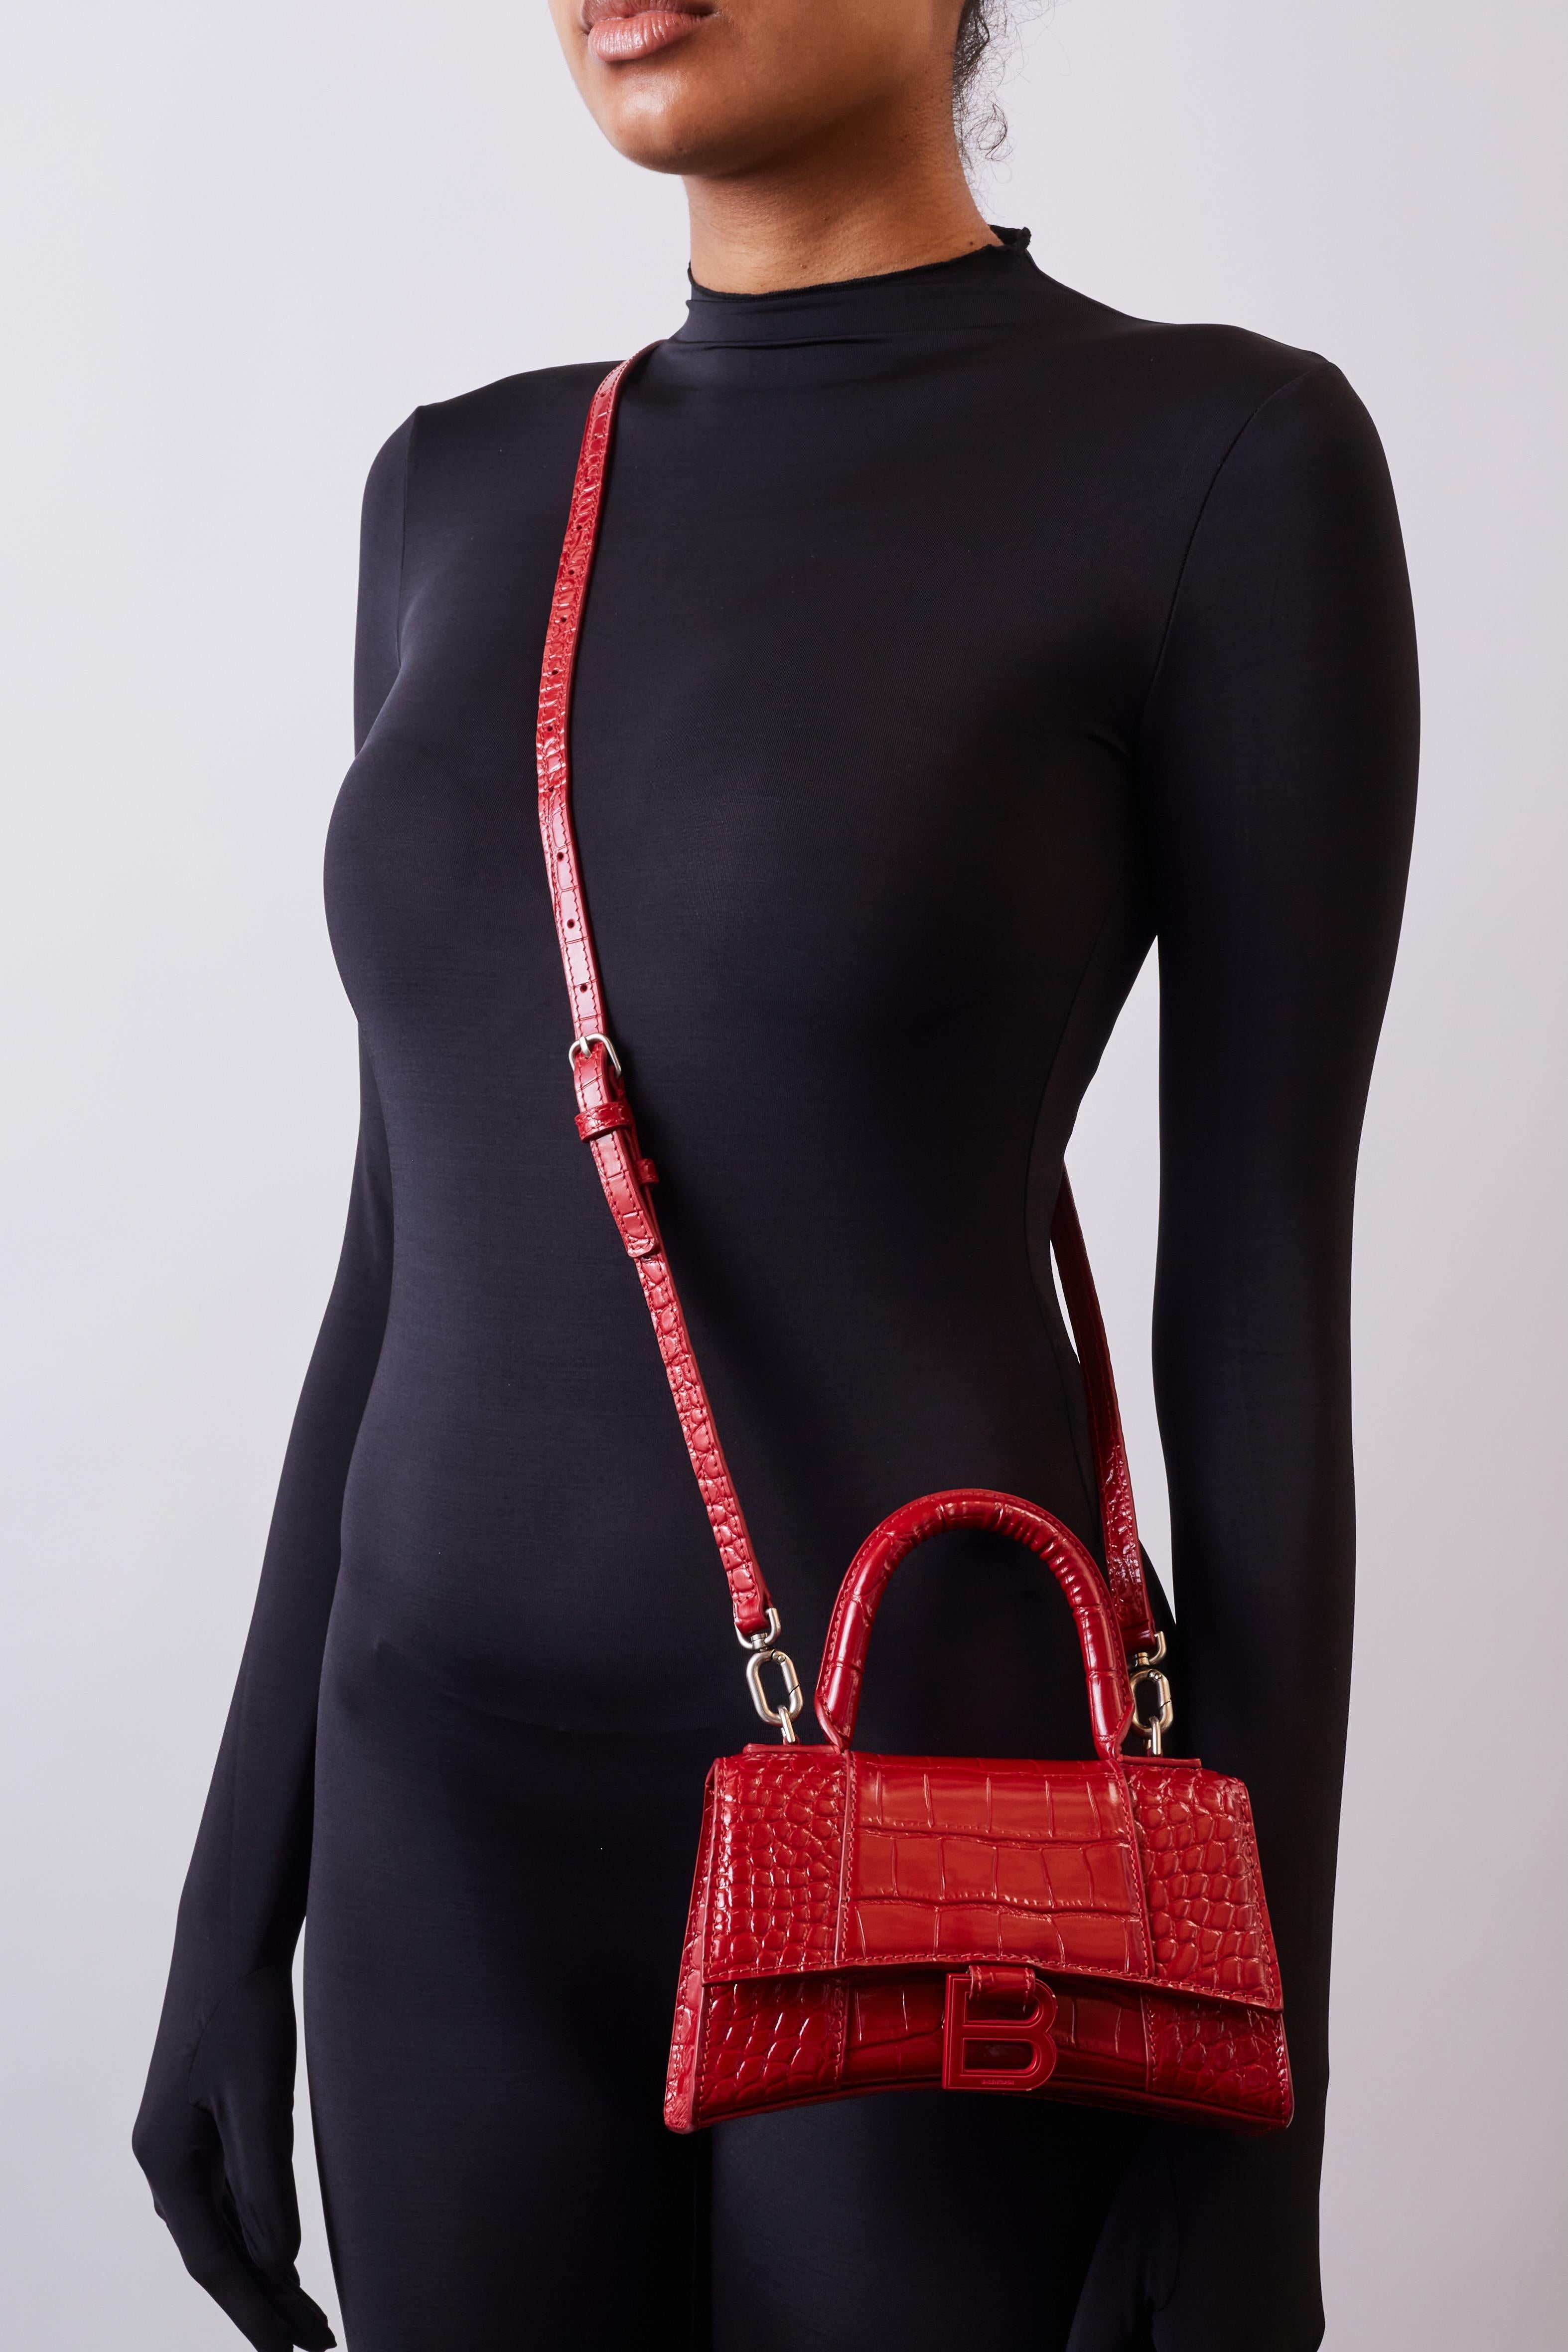 This petite handbag is made of crocodile stamped glazed calfskin in bright red. The bag features a top handle and an optional shoulder strap. This bag also features the signature Balenciaga B charm, matte red and silver tone hardware, and slip